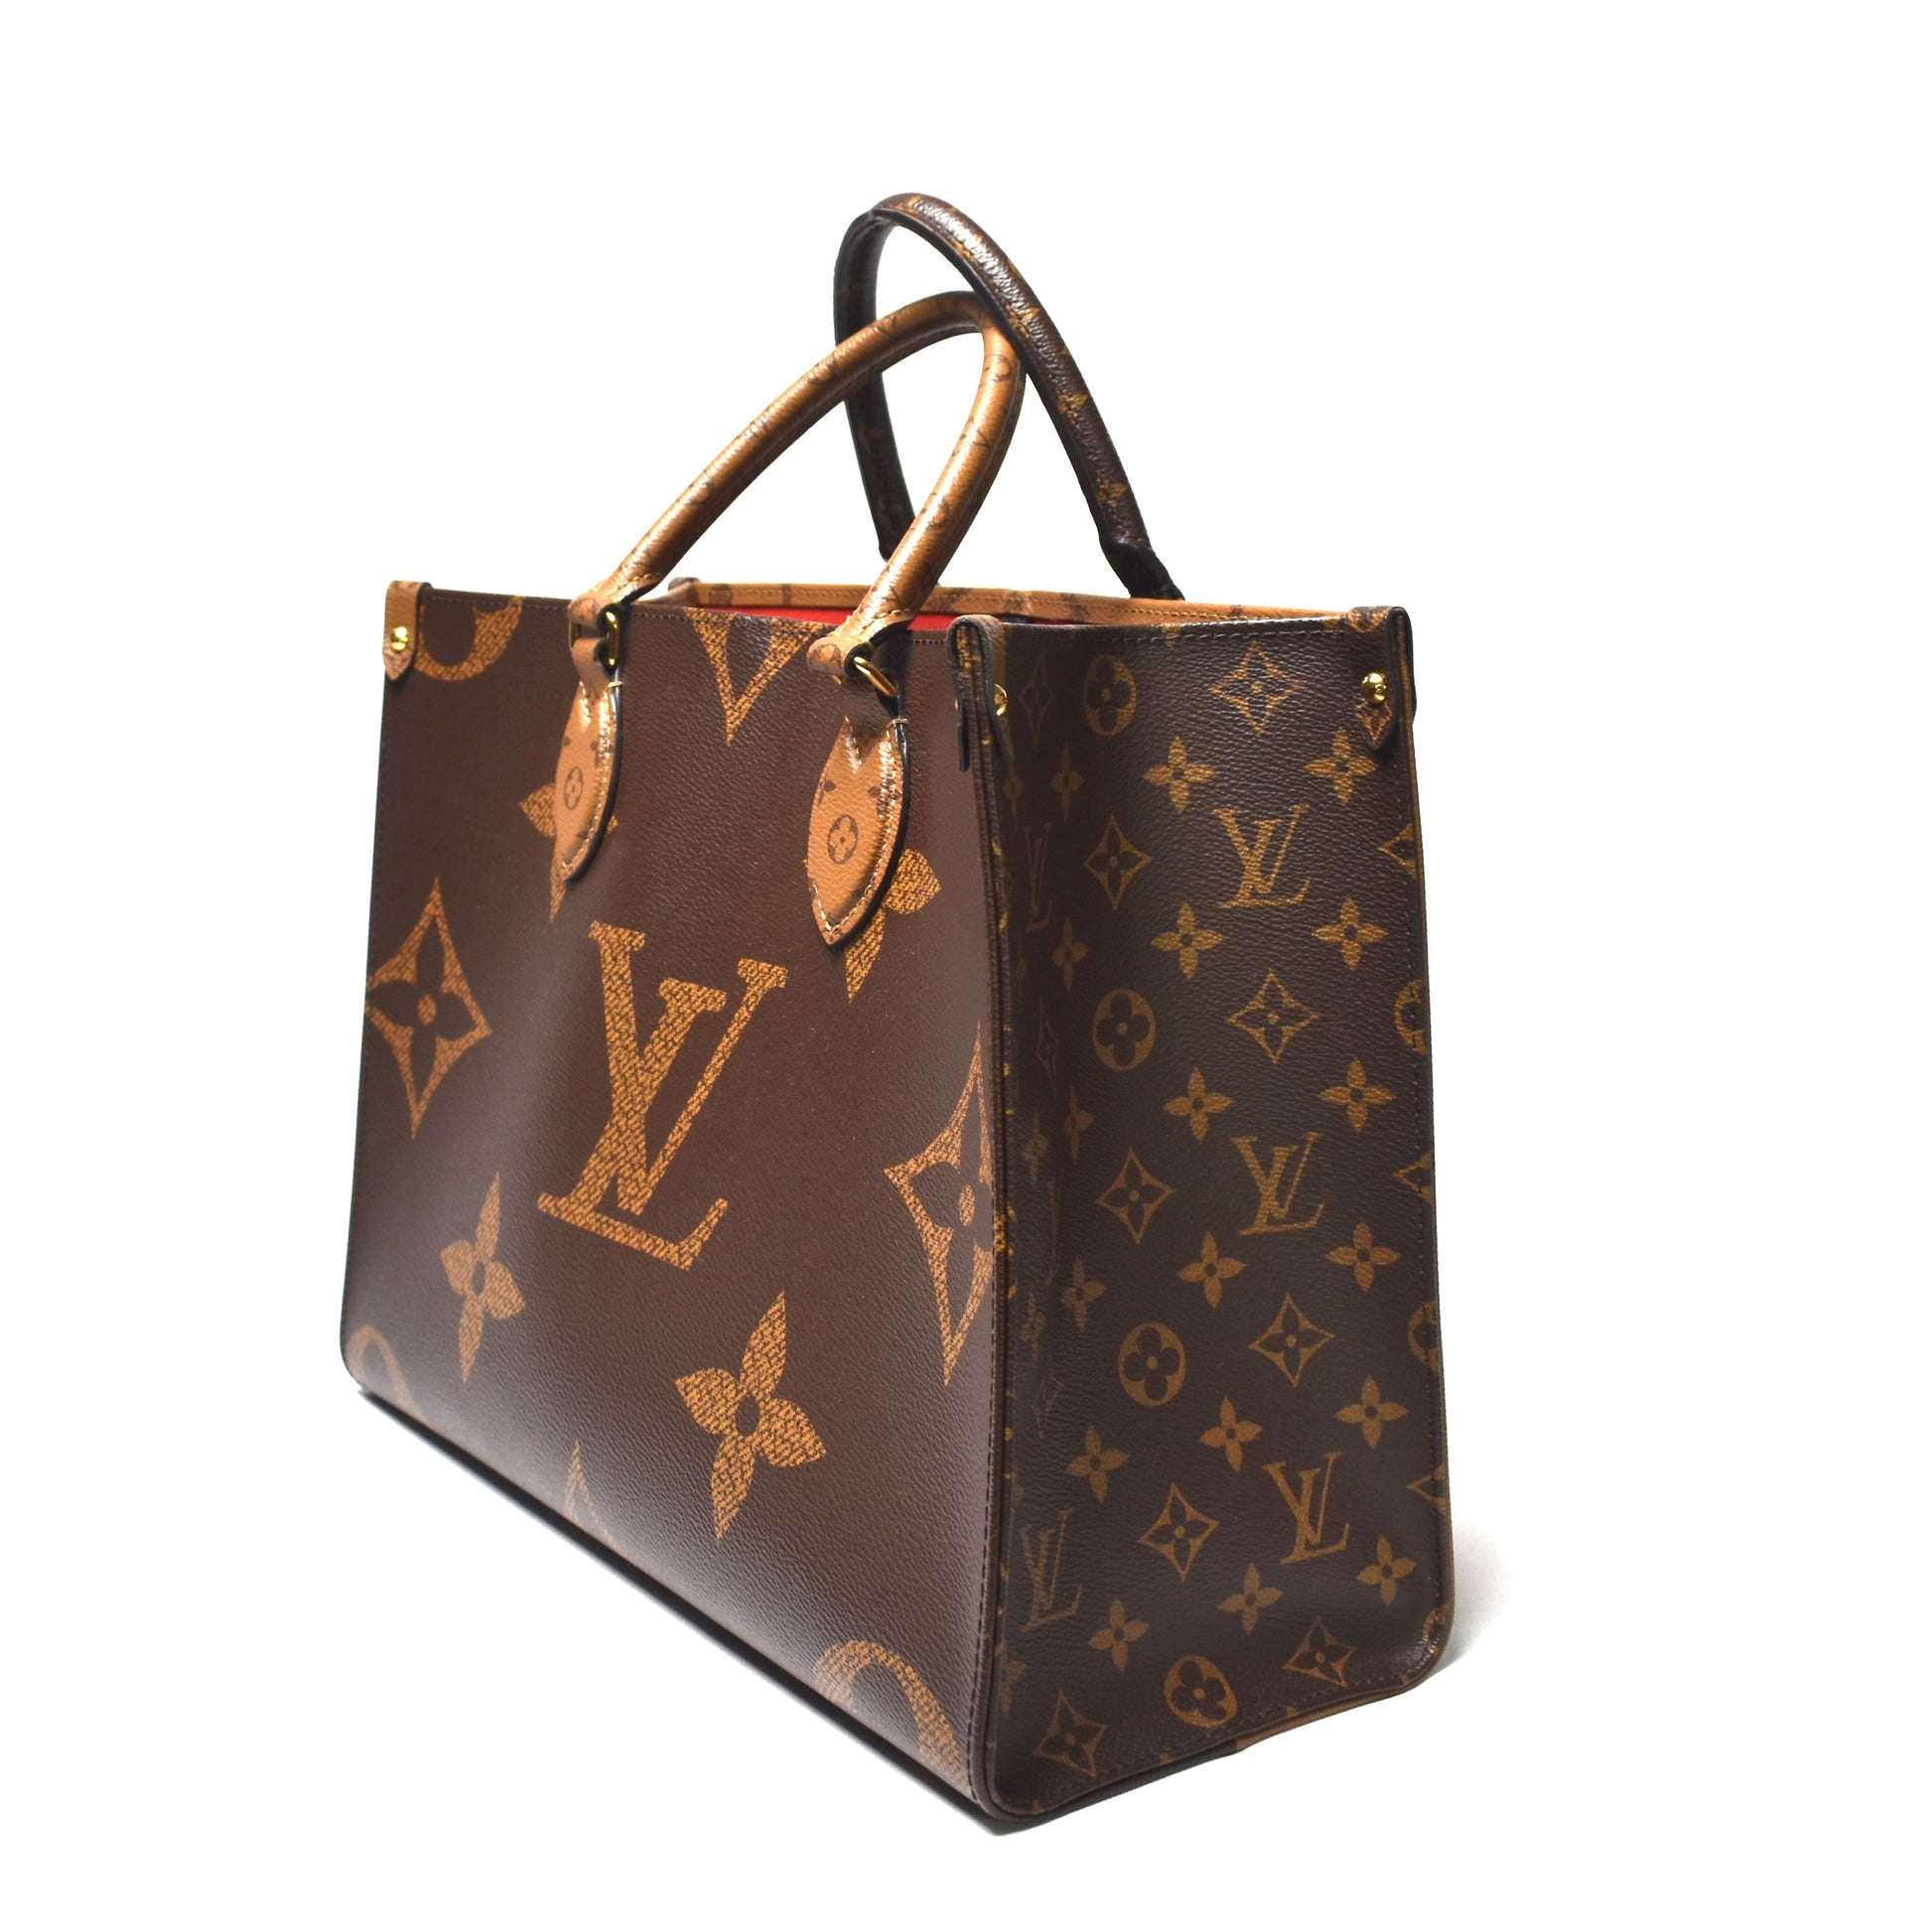 LV on the go reverse size MM (small) Size 35 x 27 x 14 cm Complete